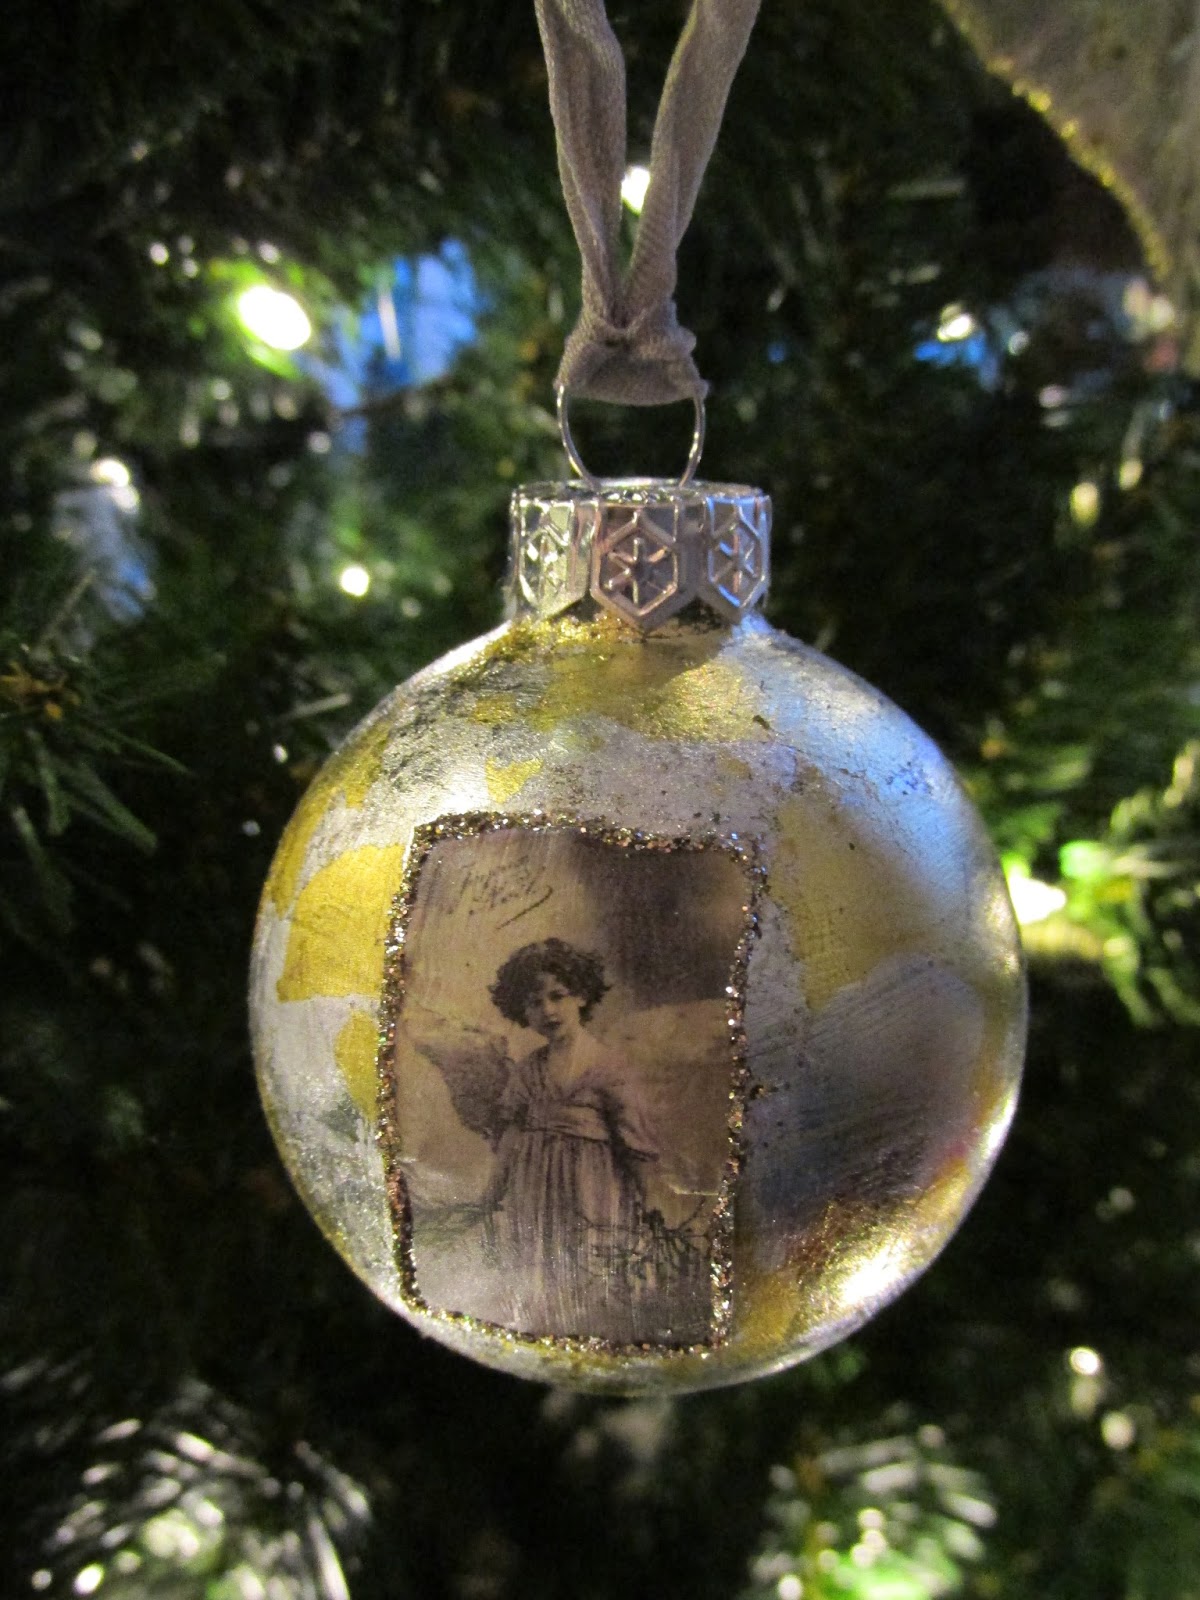 Vintage Follie: 12 Days of Christmas Day 3: Vintage Bauble